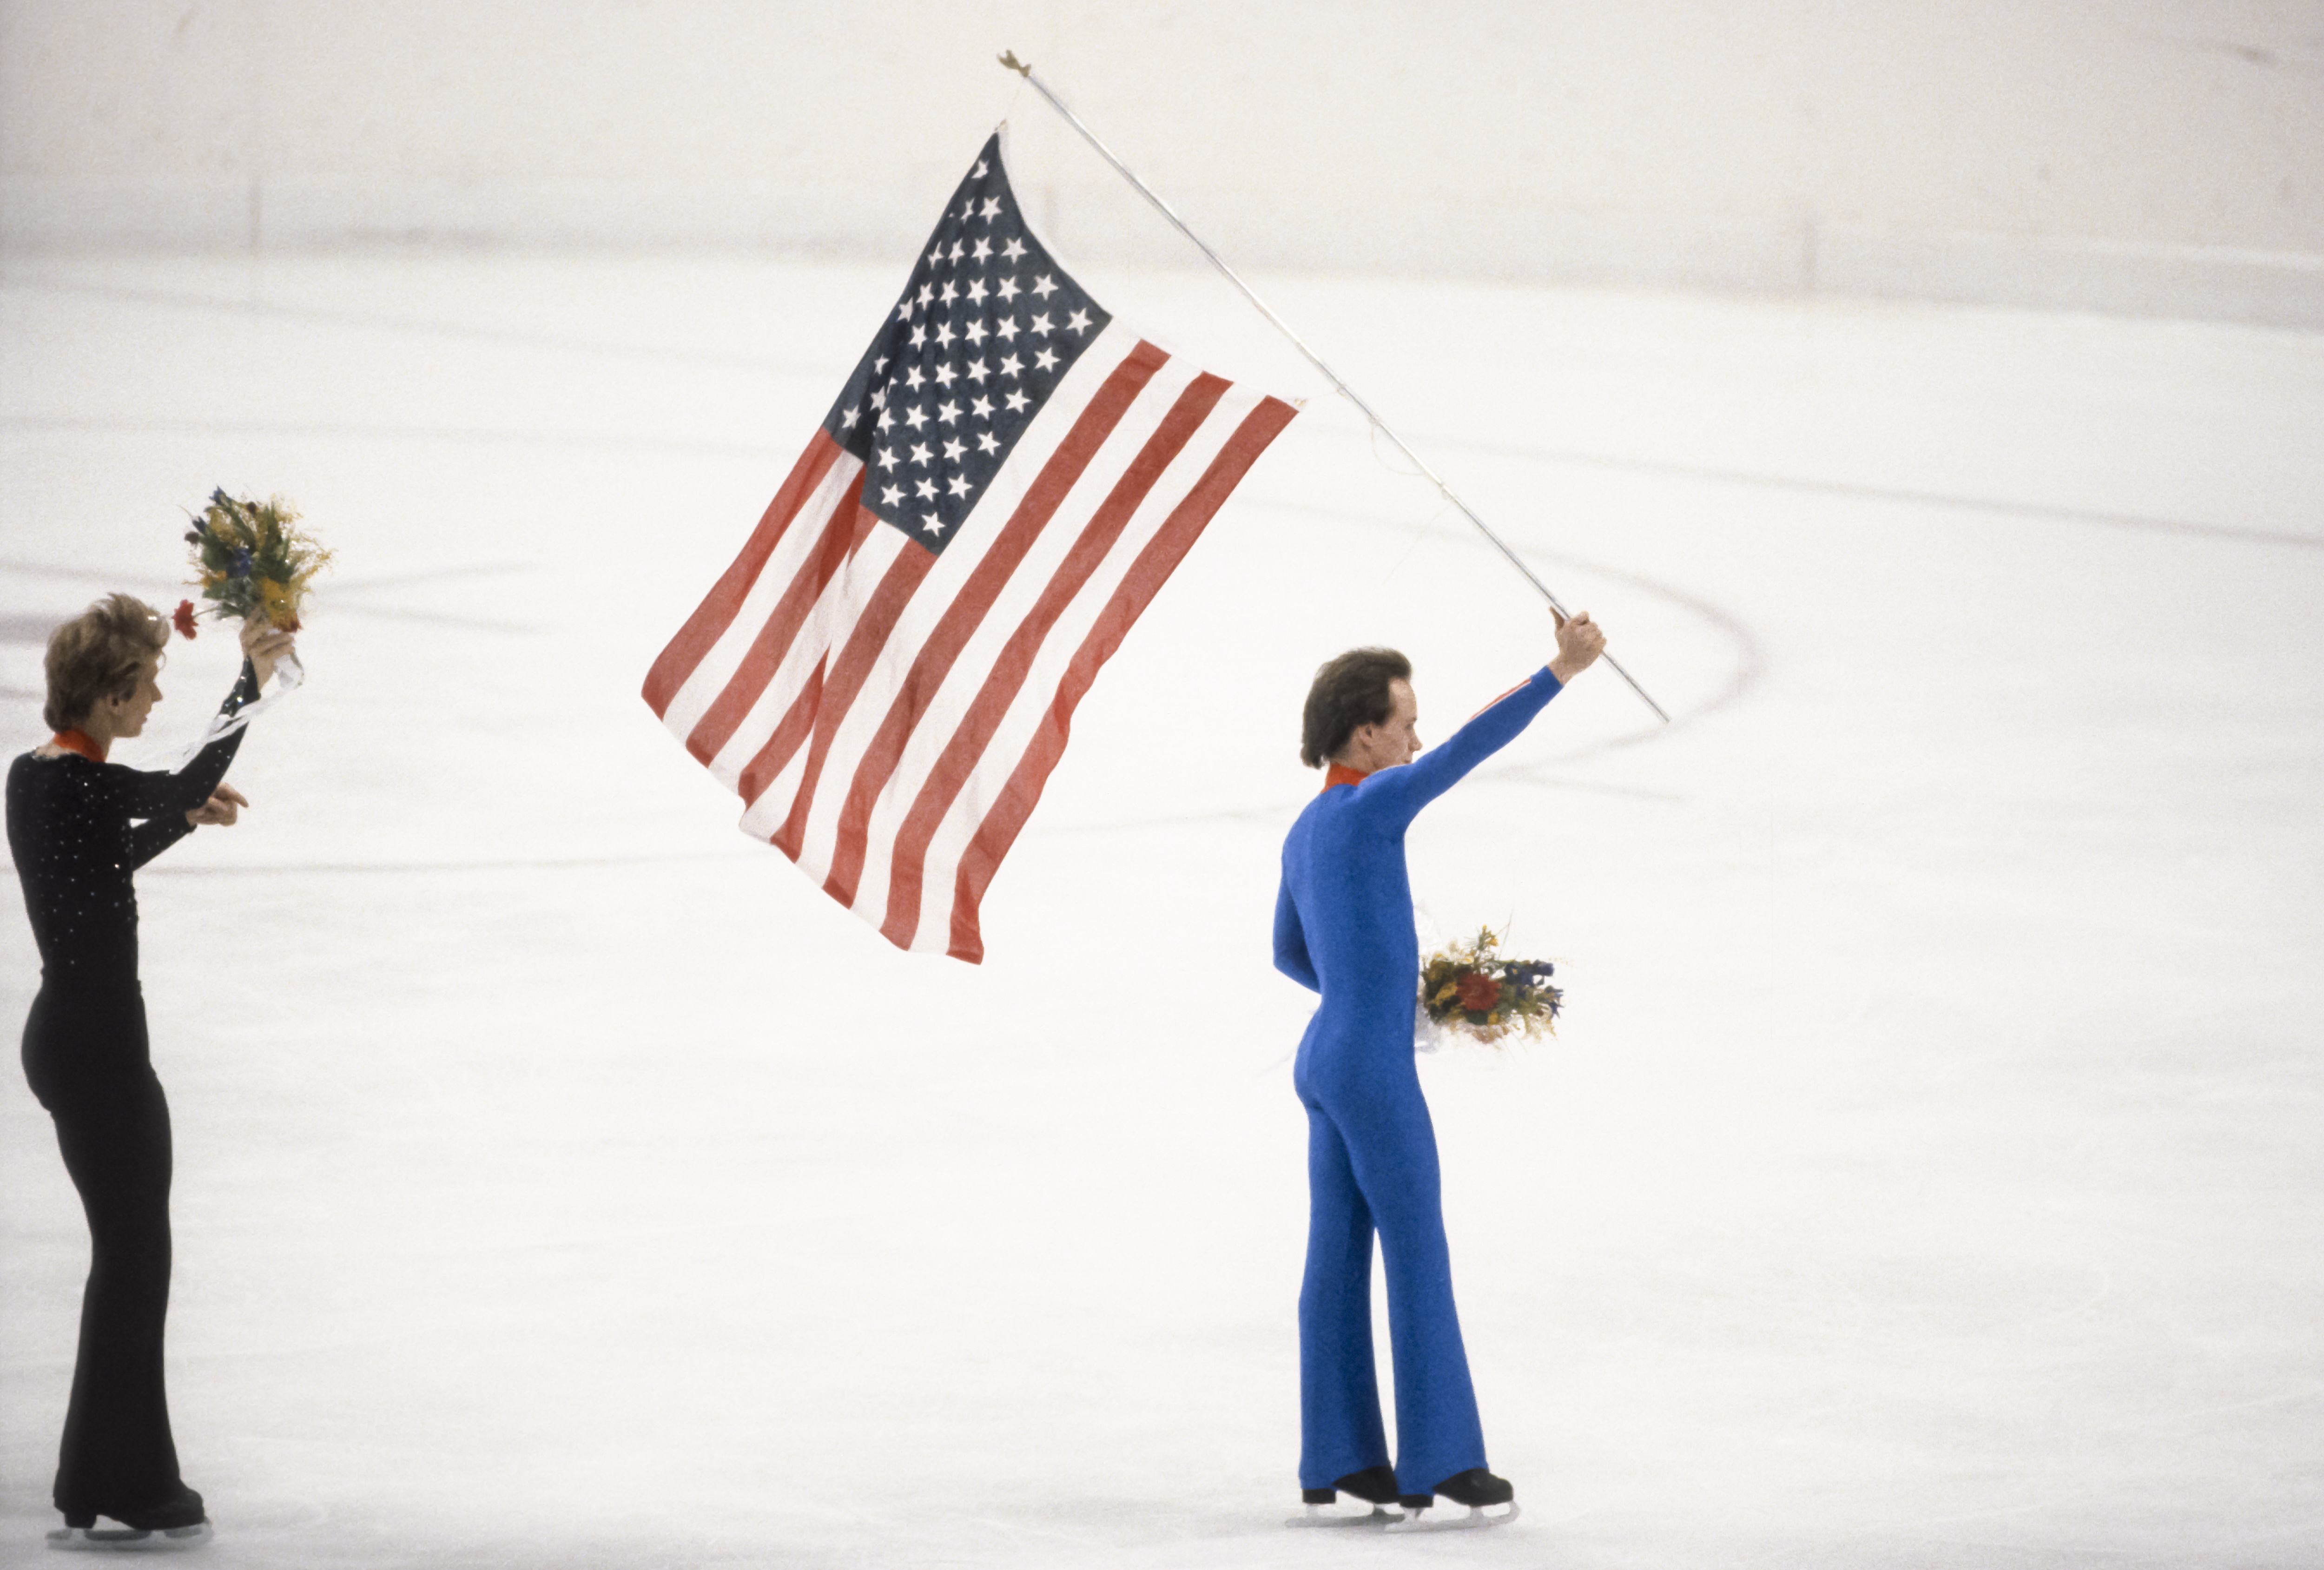 Scott Hamilton (USA) skates with the USA flag following the medal ceremony for the Men's Singles competition in the 1984 Winter Olympics in Sarajevo, Yugoslavia on February 16, 1984 | Source: Getty Images